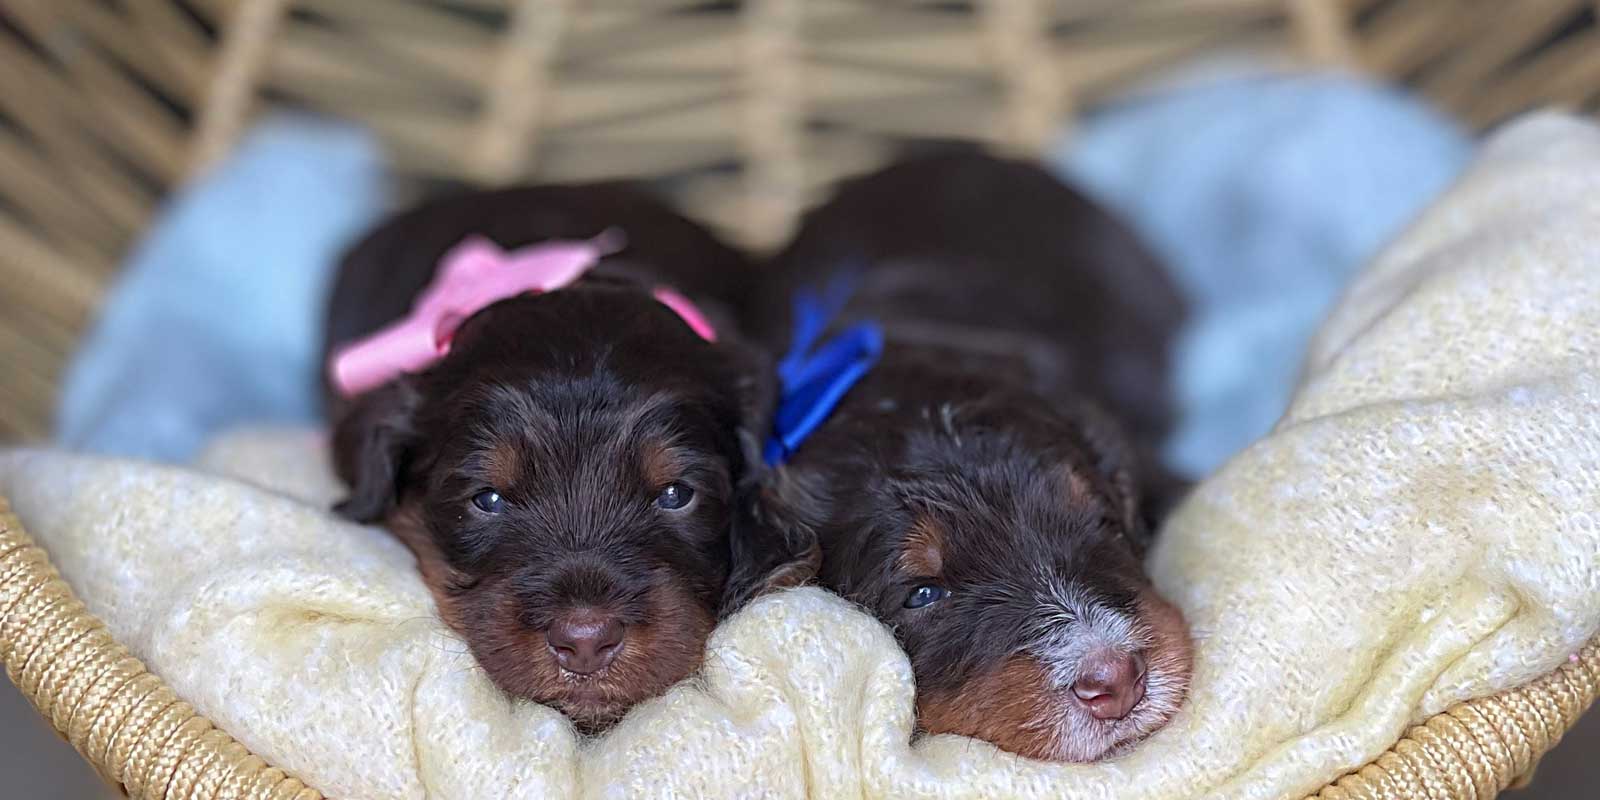 Bernedoodle puppies by Dee Dee and Milo at Life is Better with Doodles